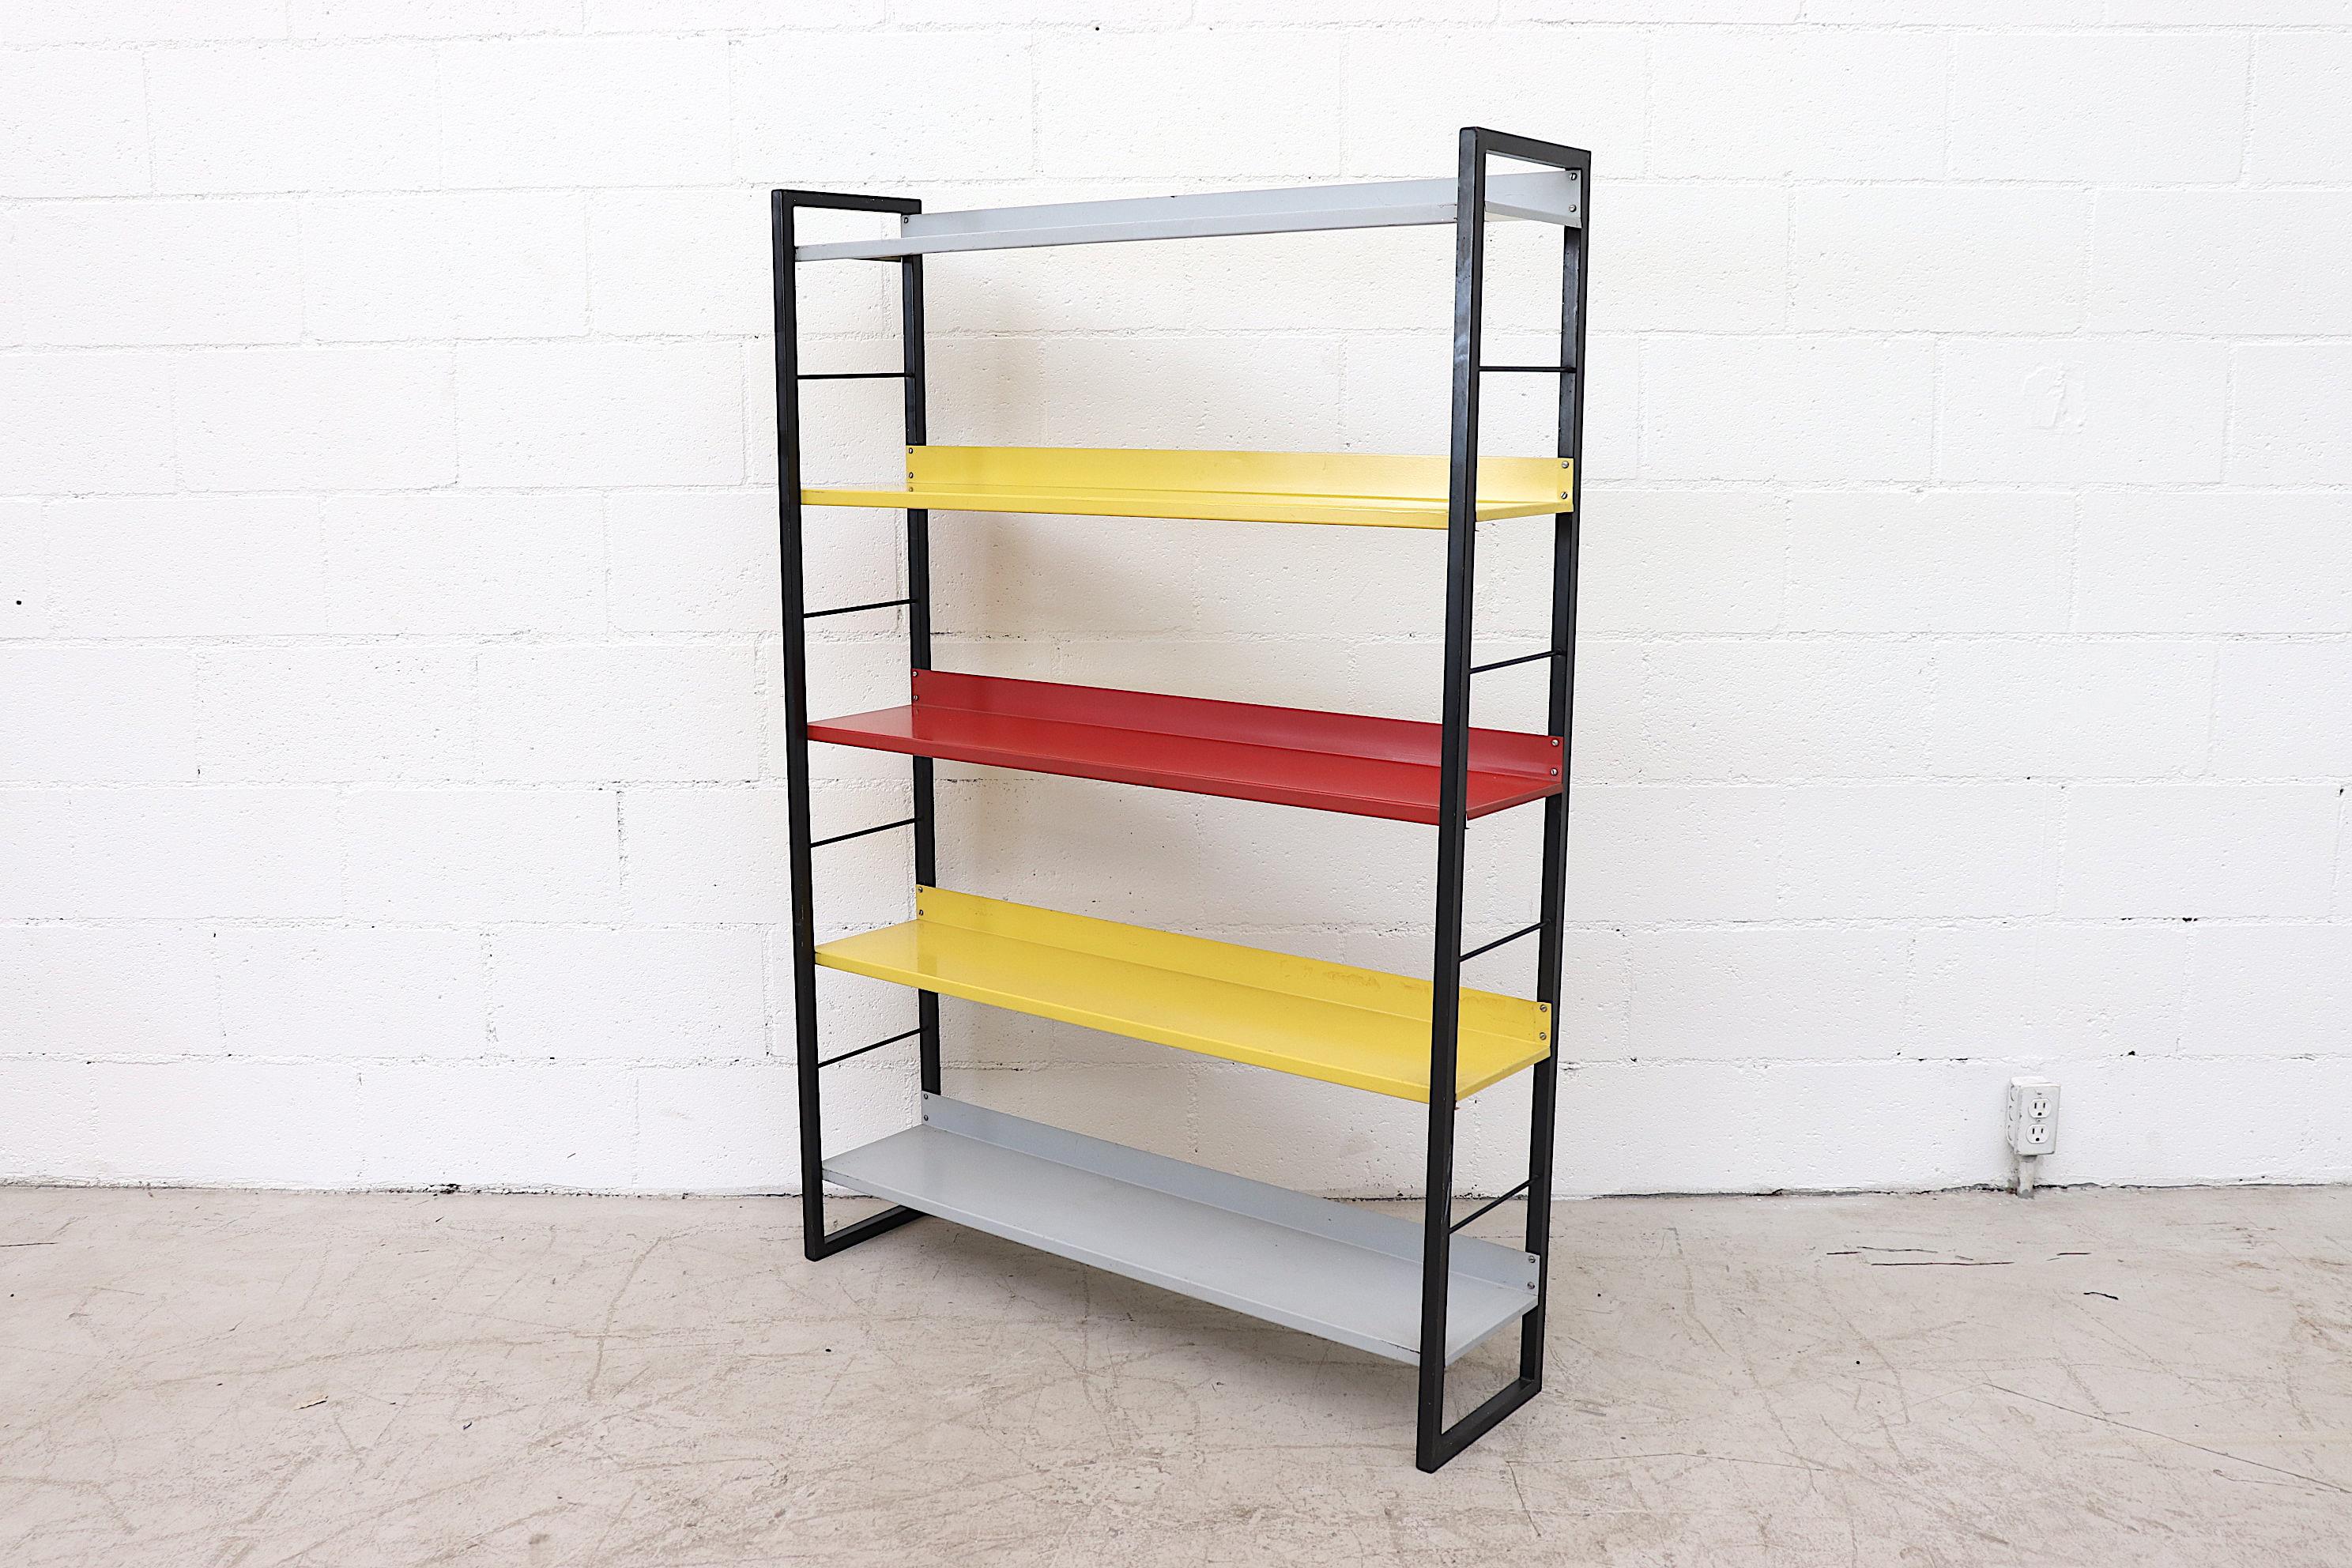 From Famed Dutch Manufacturer Tomado (An acronym for Van der TOgt Massa Artikelen DOrdrecht meaning Van Der Togt Mass Articles Dordrecht - Dordrecht being the city the company originated from) comes this enameled metal standing book shelf with